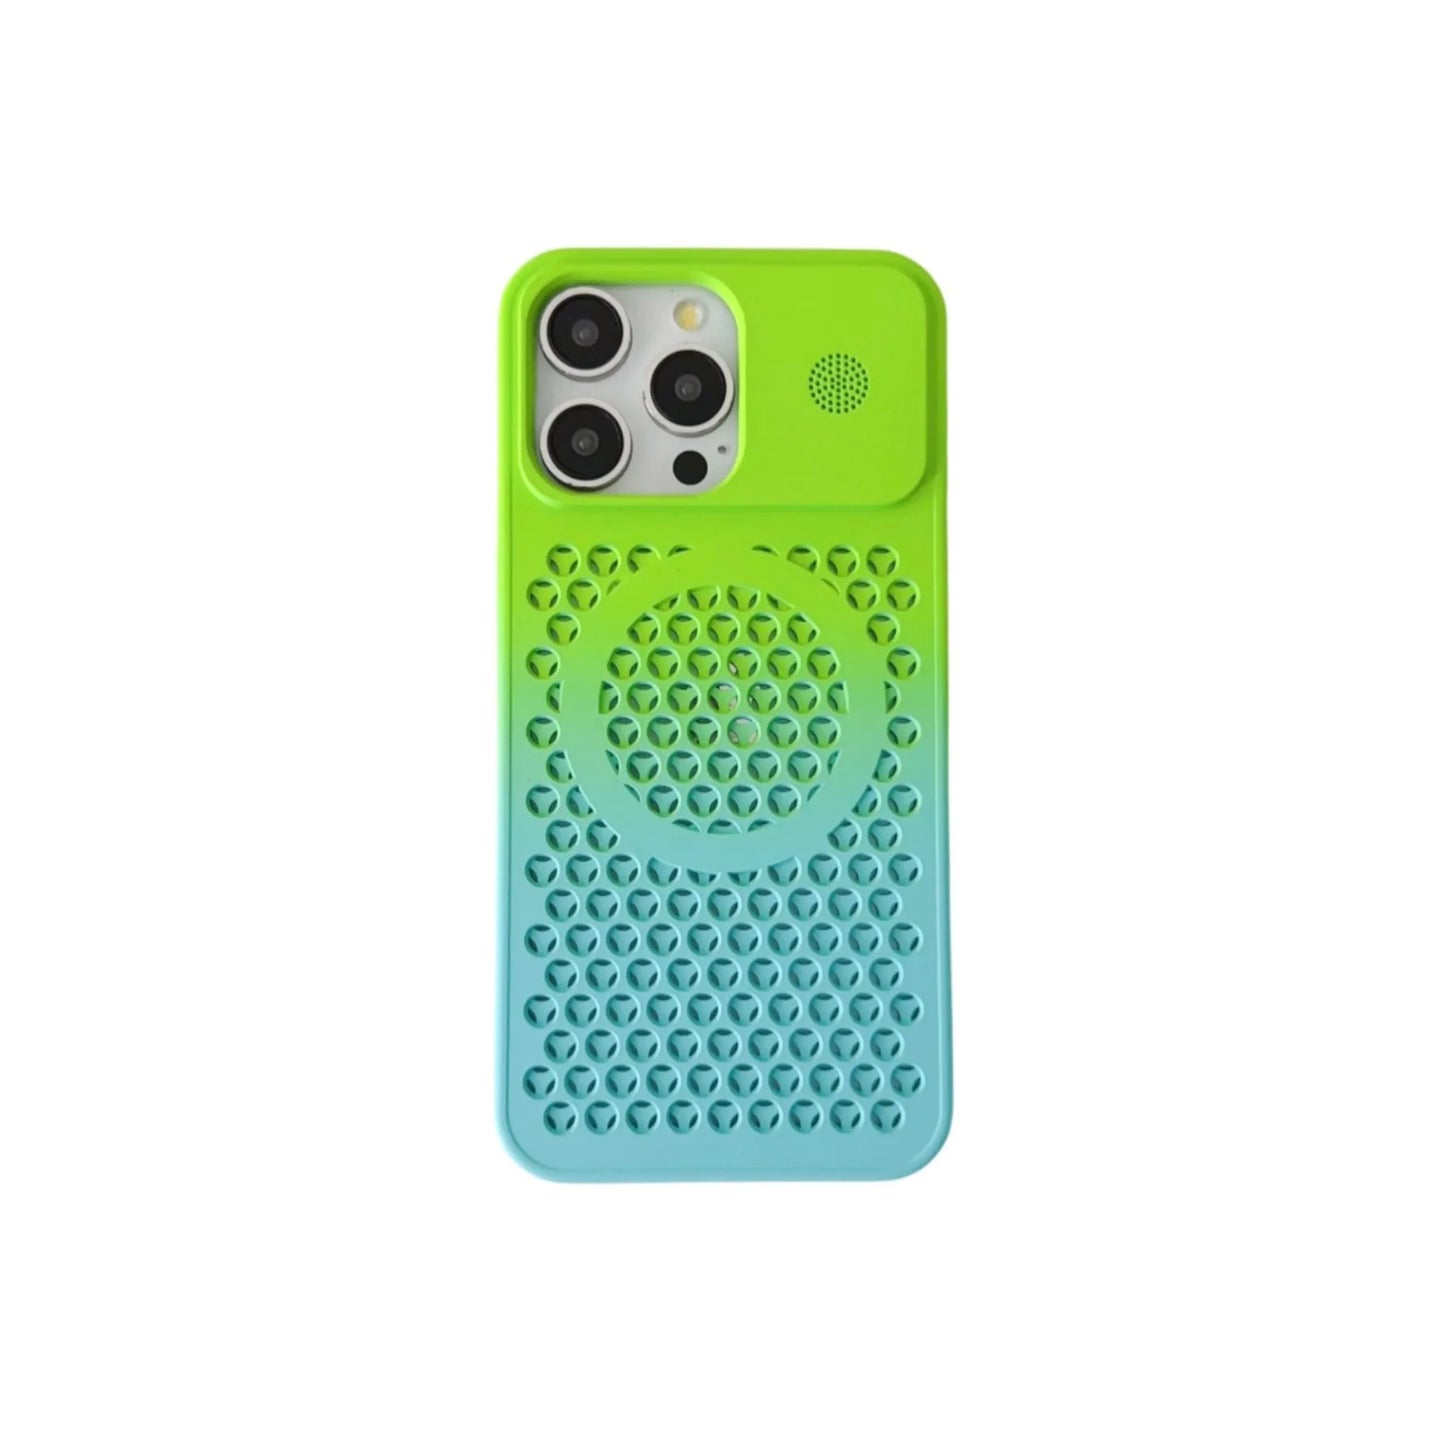 Colorful Heat Dissipation Soft Case For iPhone